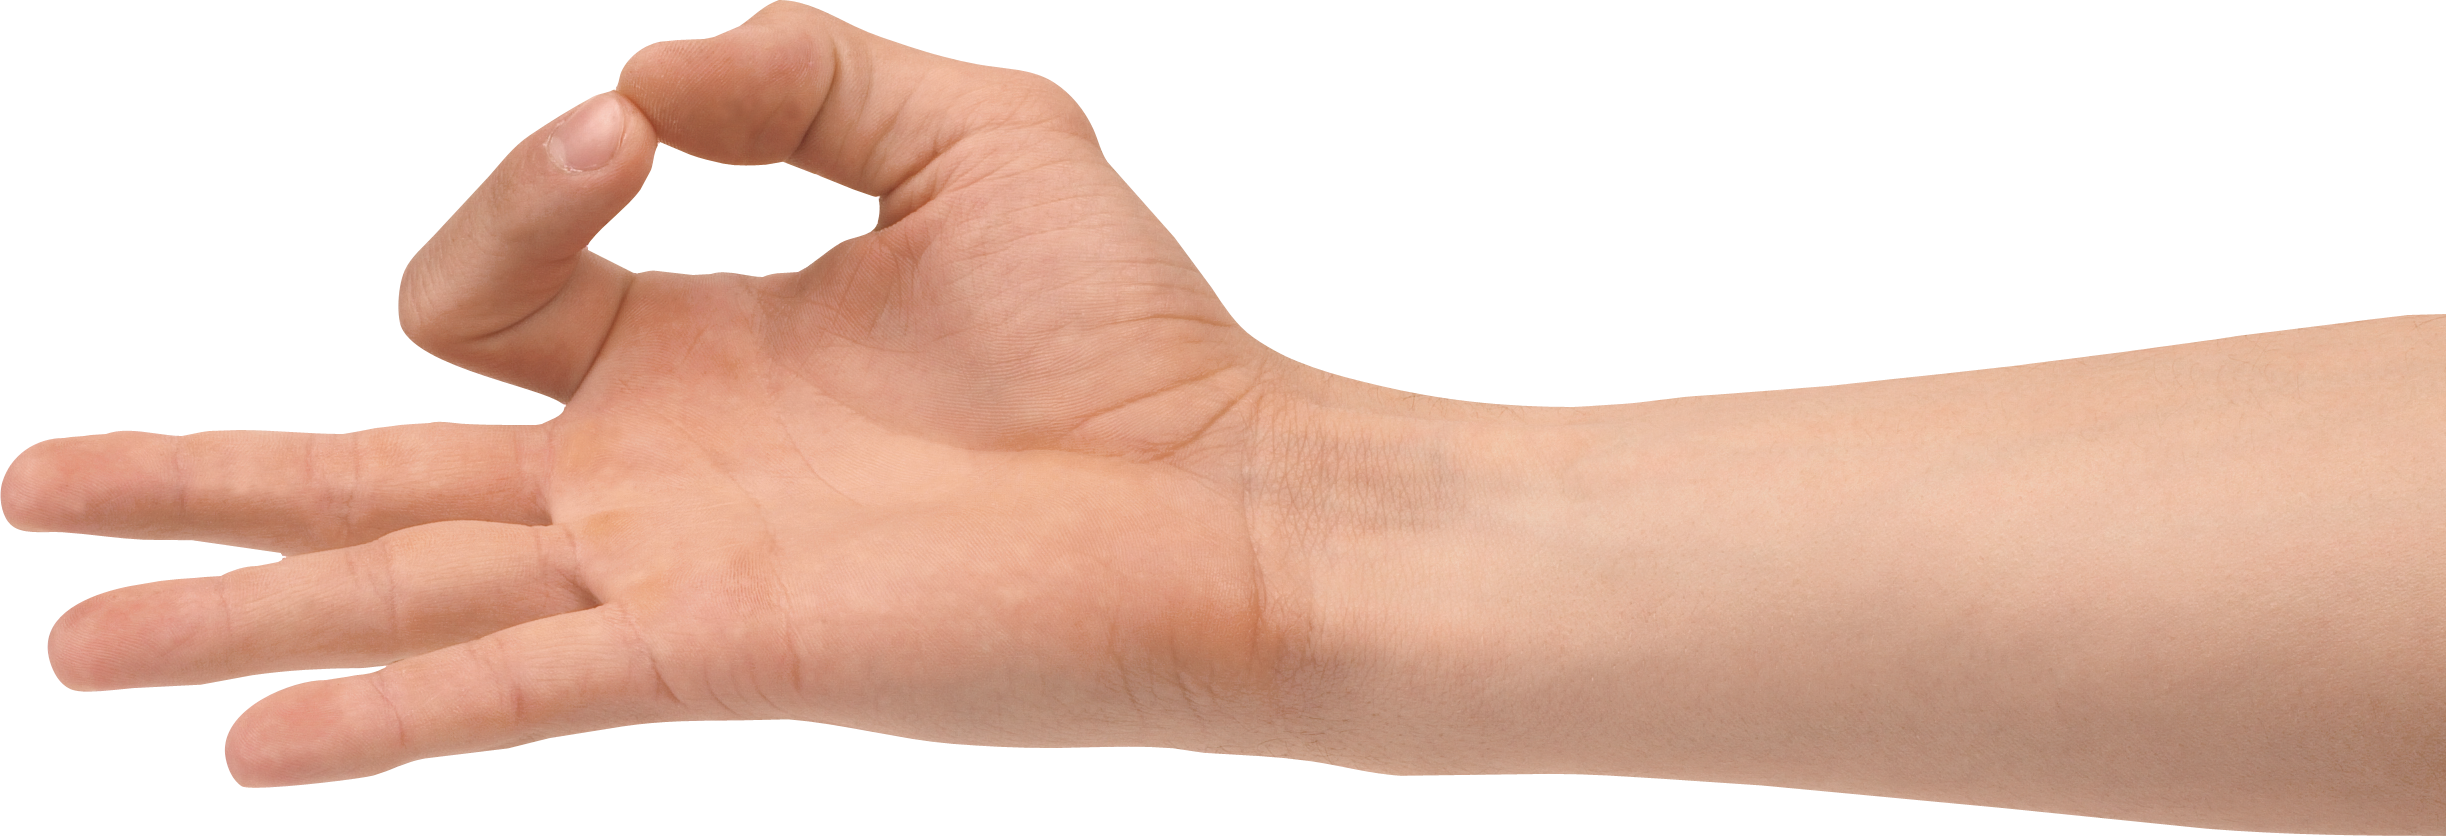 Hands clipart forearm. Png free images pictures